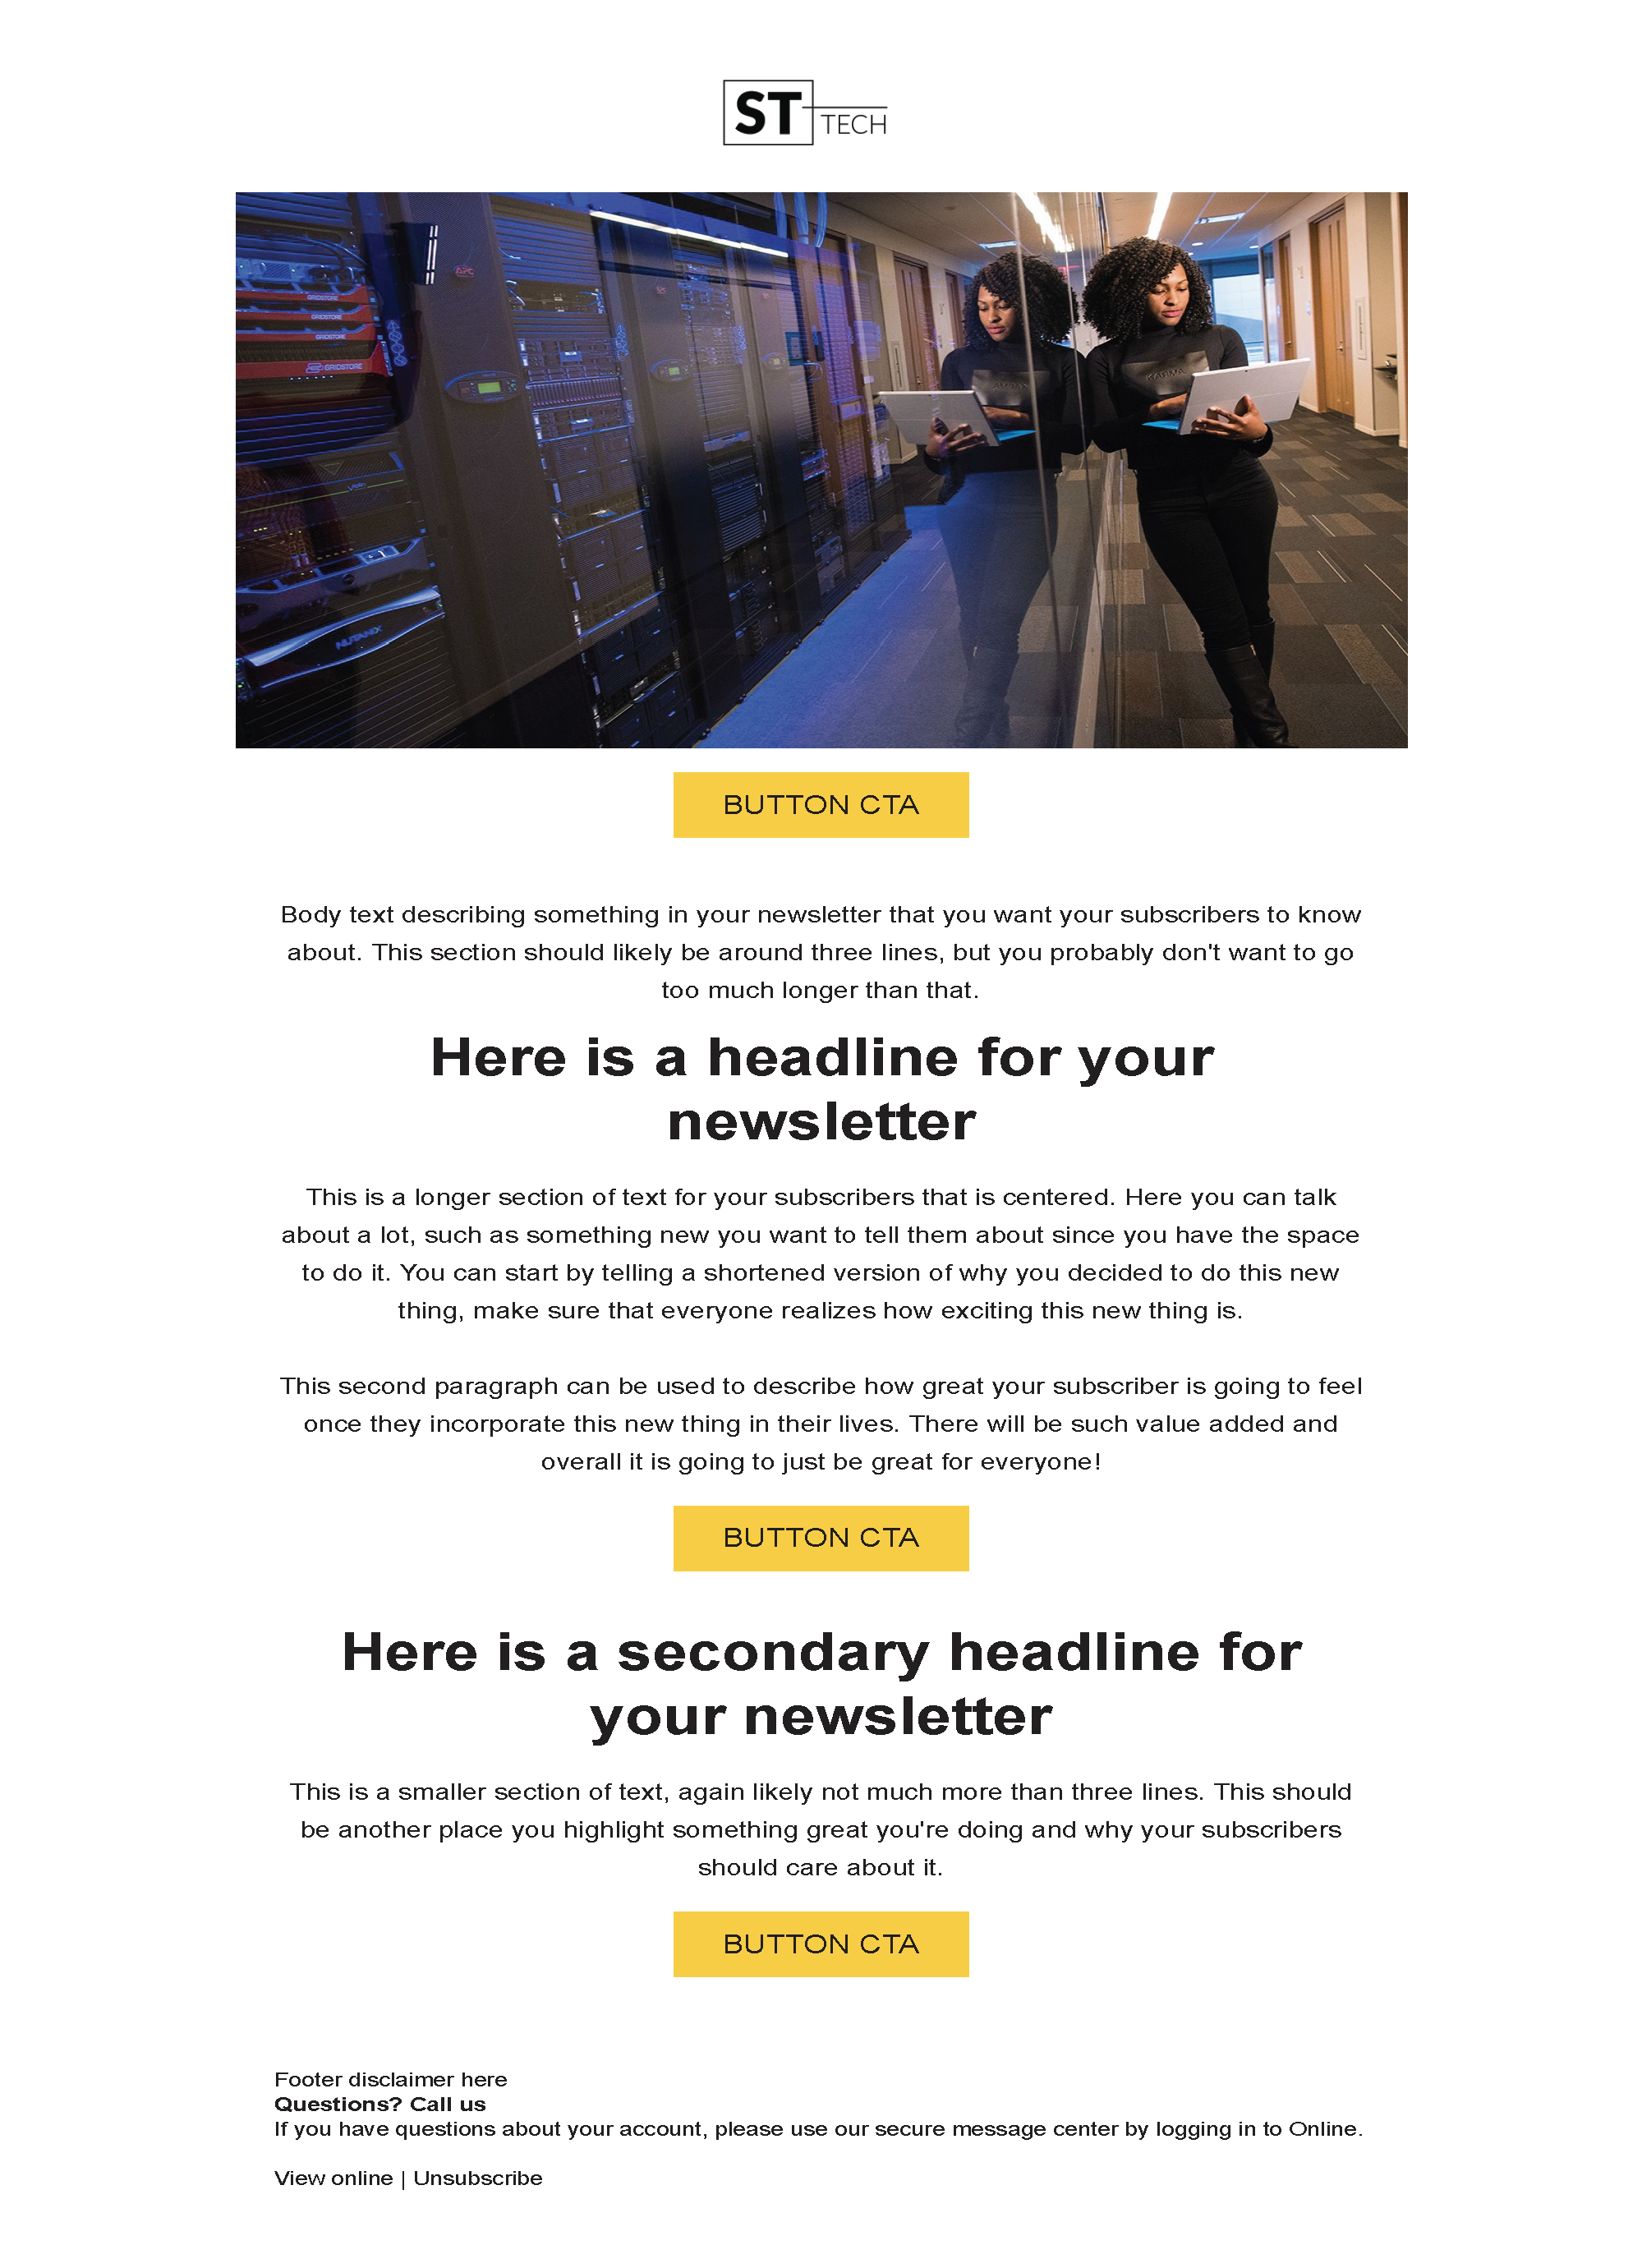 Newsletter email template 2 for technology companies